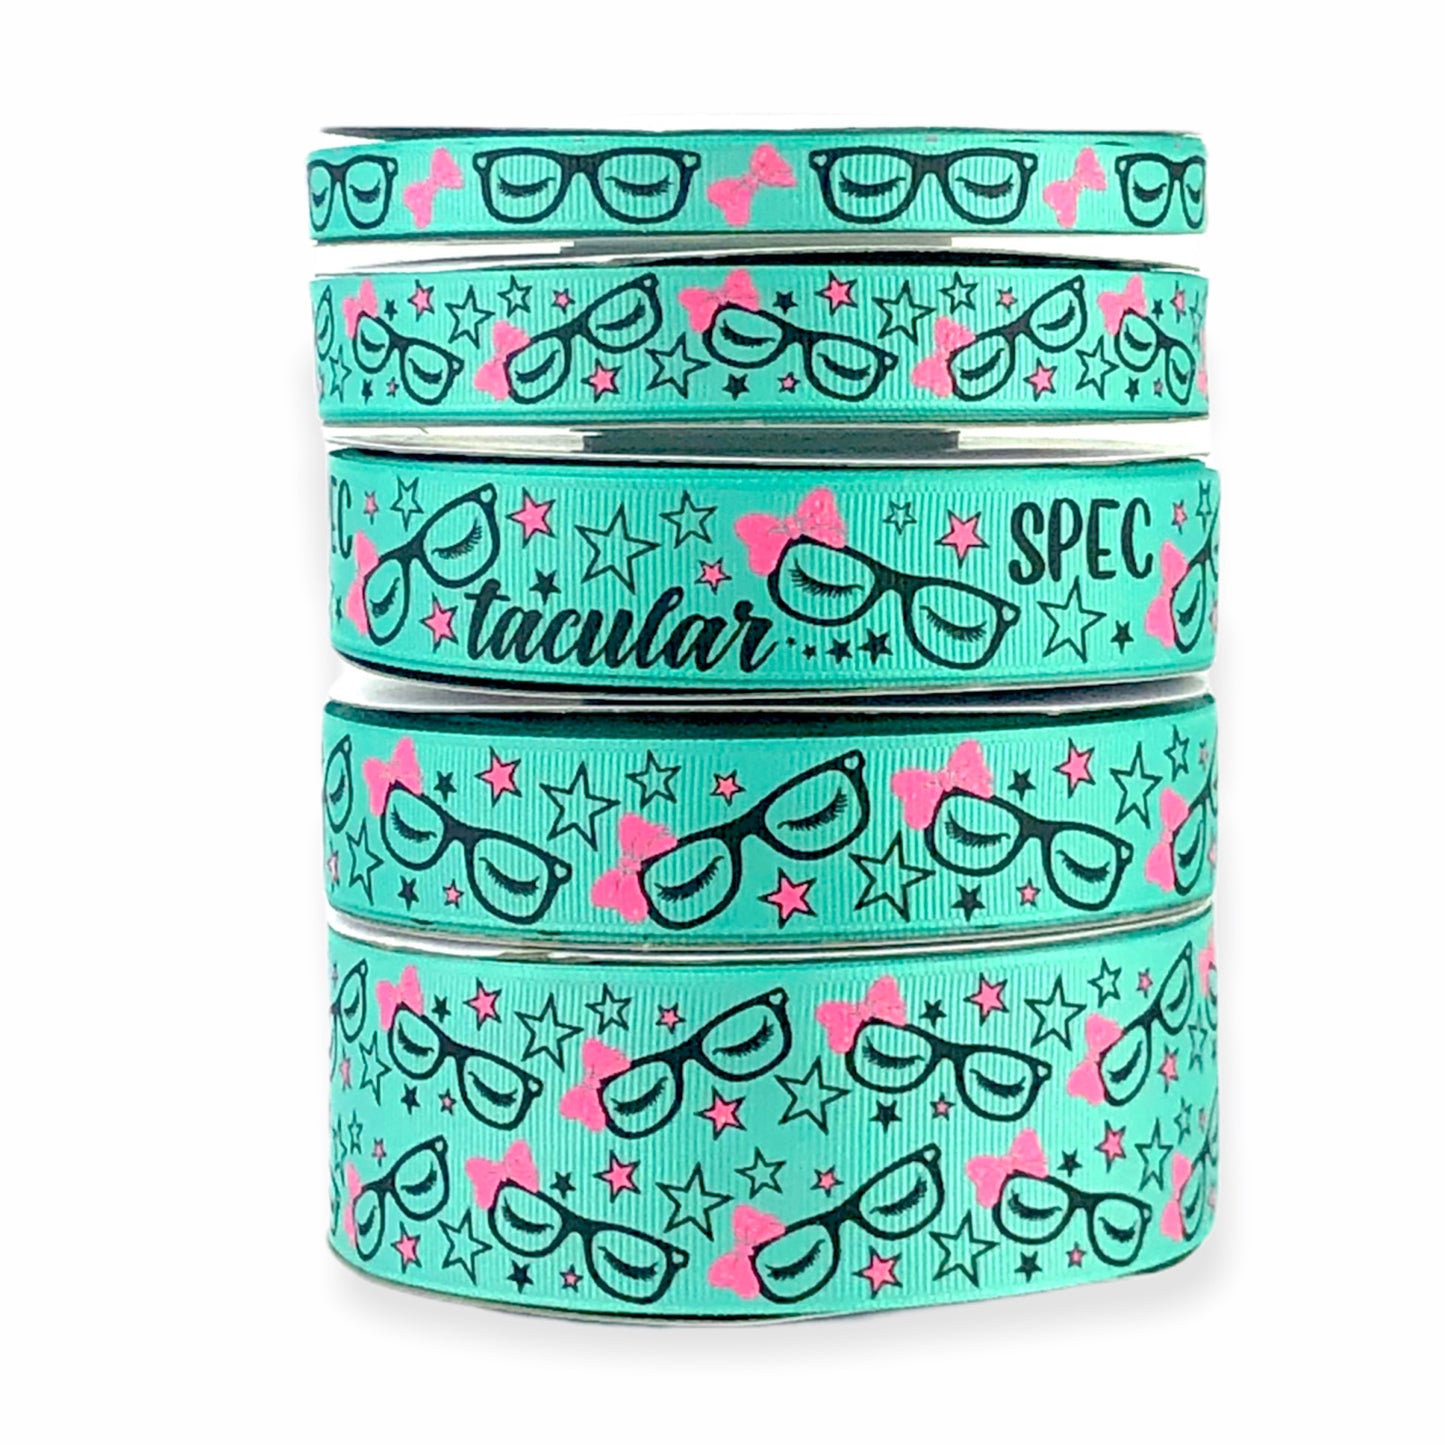 Spectacular Grosgrain Ribbon Collection On Tropic